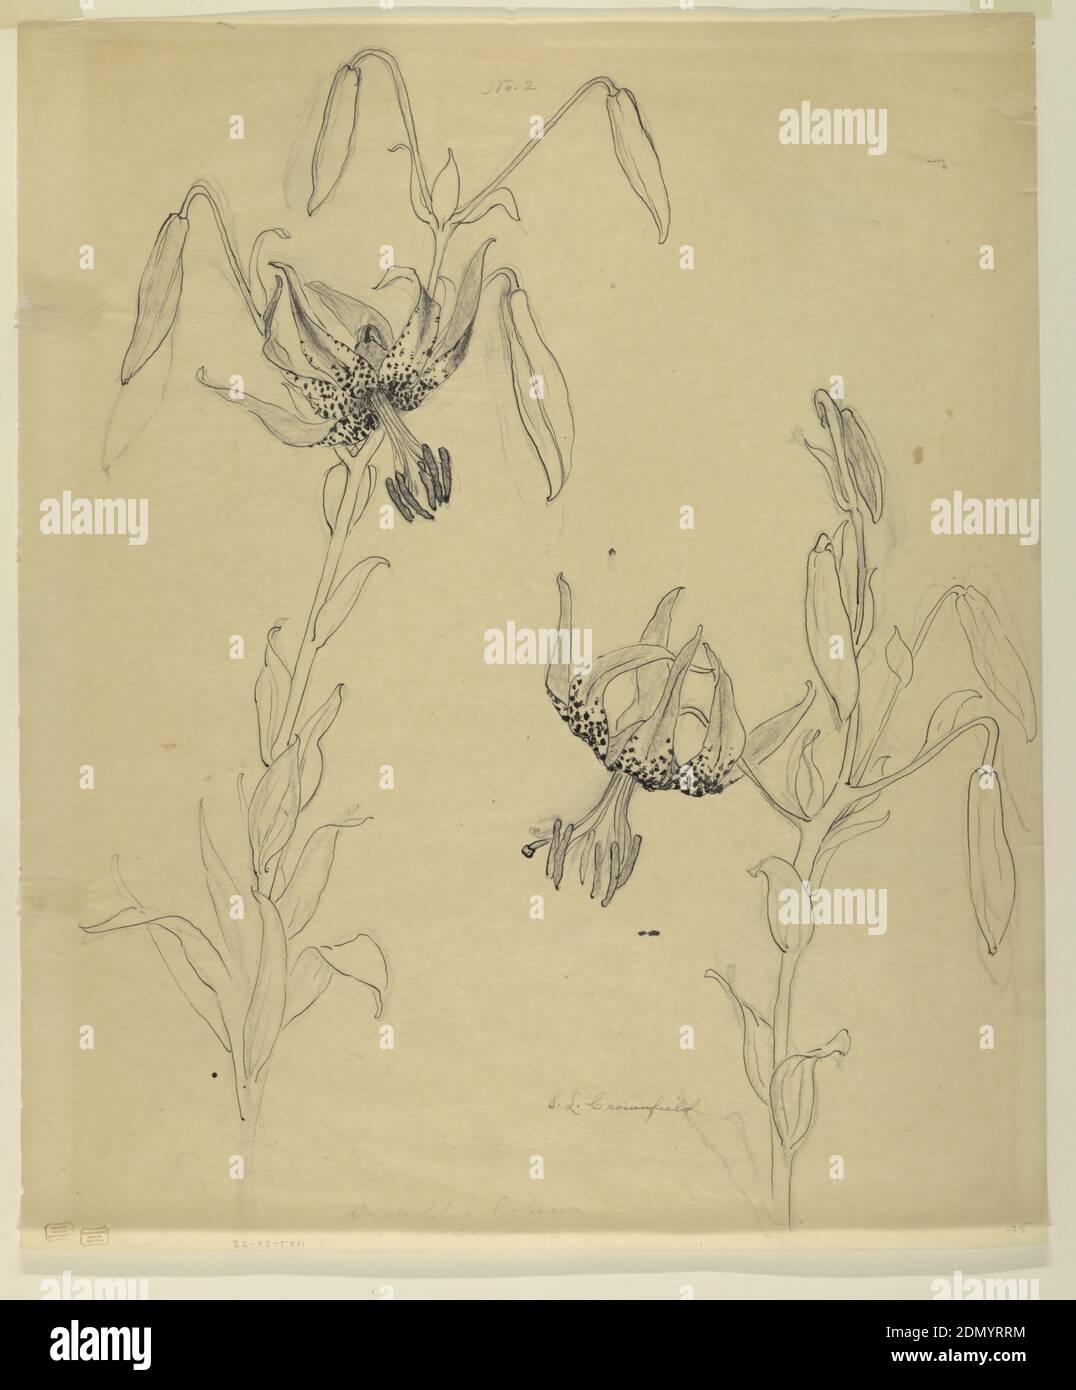 Study of Tiger Lilies, Sophia L. Crownfield, (American, 1862–1929), Pen and ink, graphite on tracing paper, Vertical sheet depicting two stalks of tiger lilies, each with buds and one open blossom., USA, early 20th century, nature studies, Drawing Stock Photo